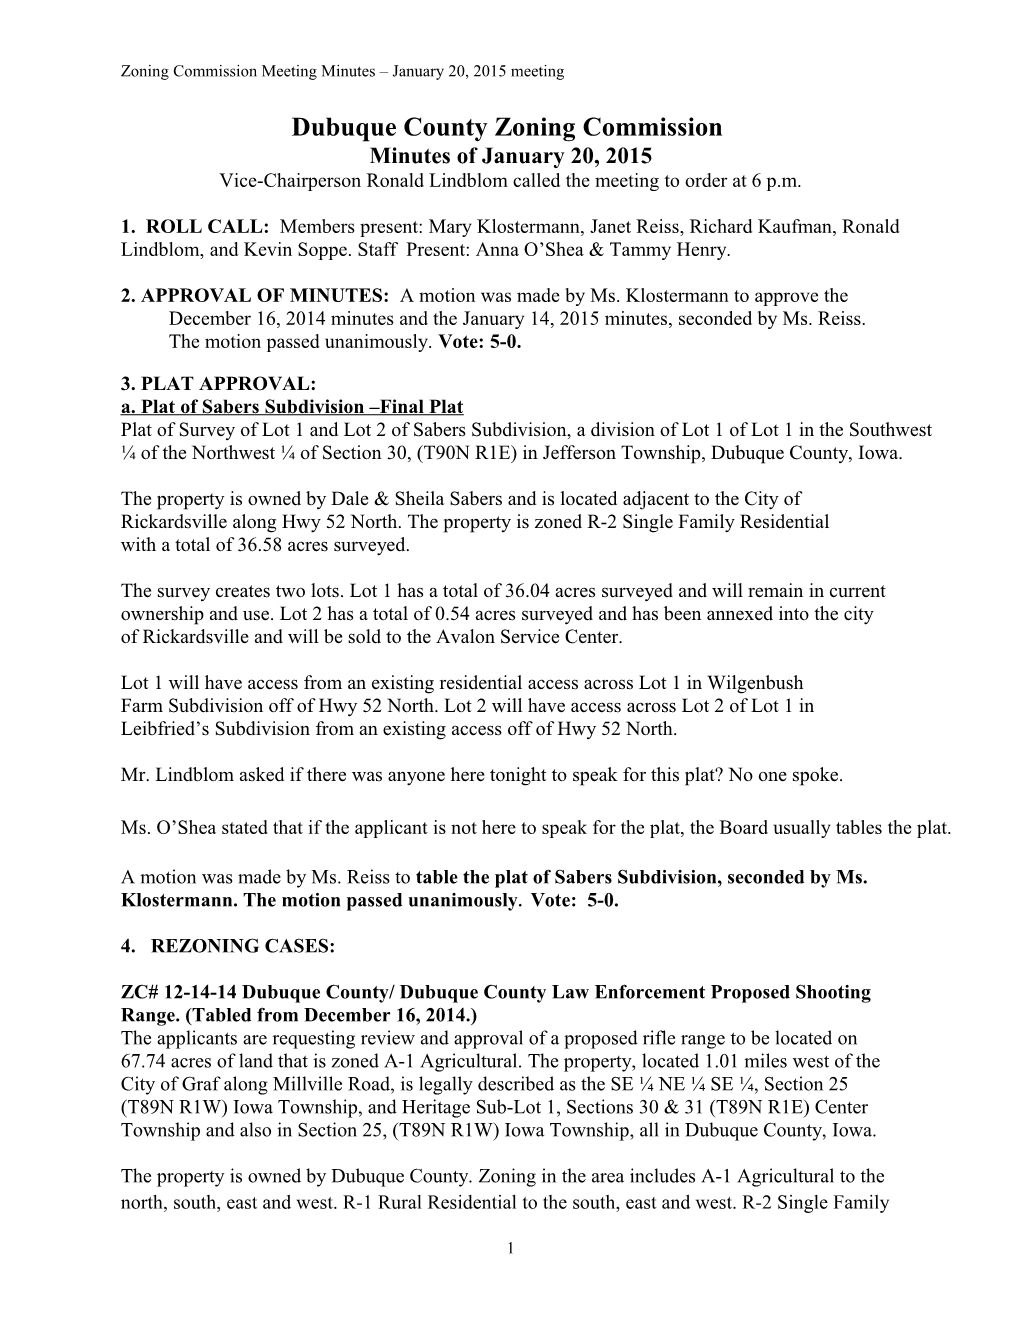 Dubuque County Board of Adjustment s4